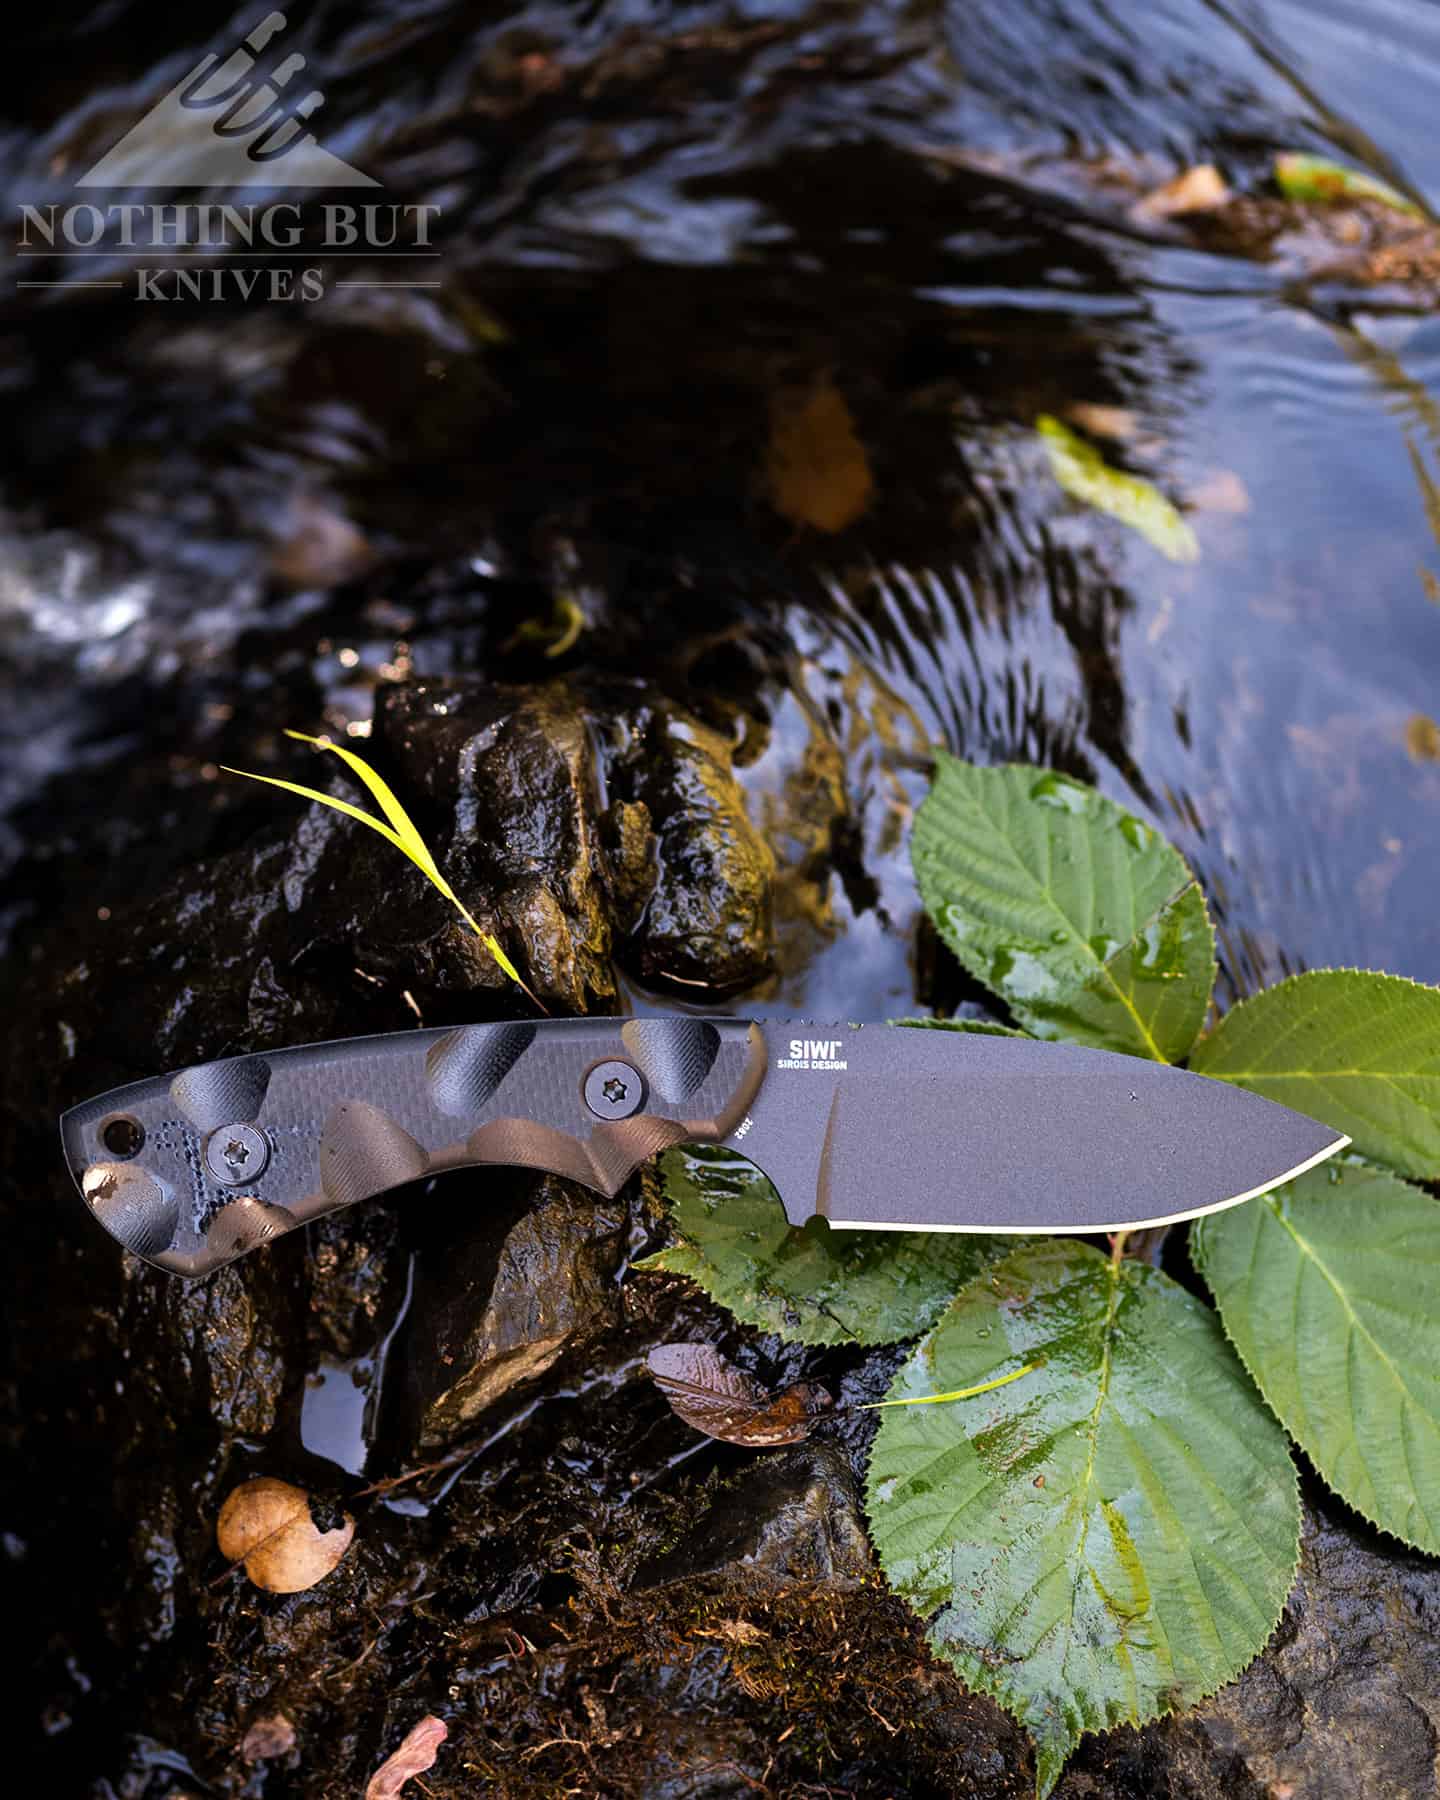 The CRKT SIWI is a capable outdoor knife that can handle both camping and tactical tasks well. 